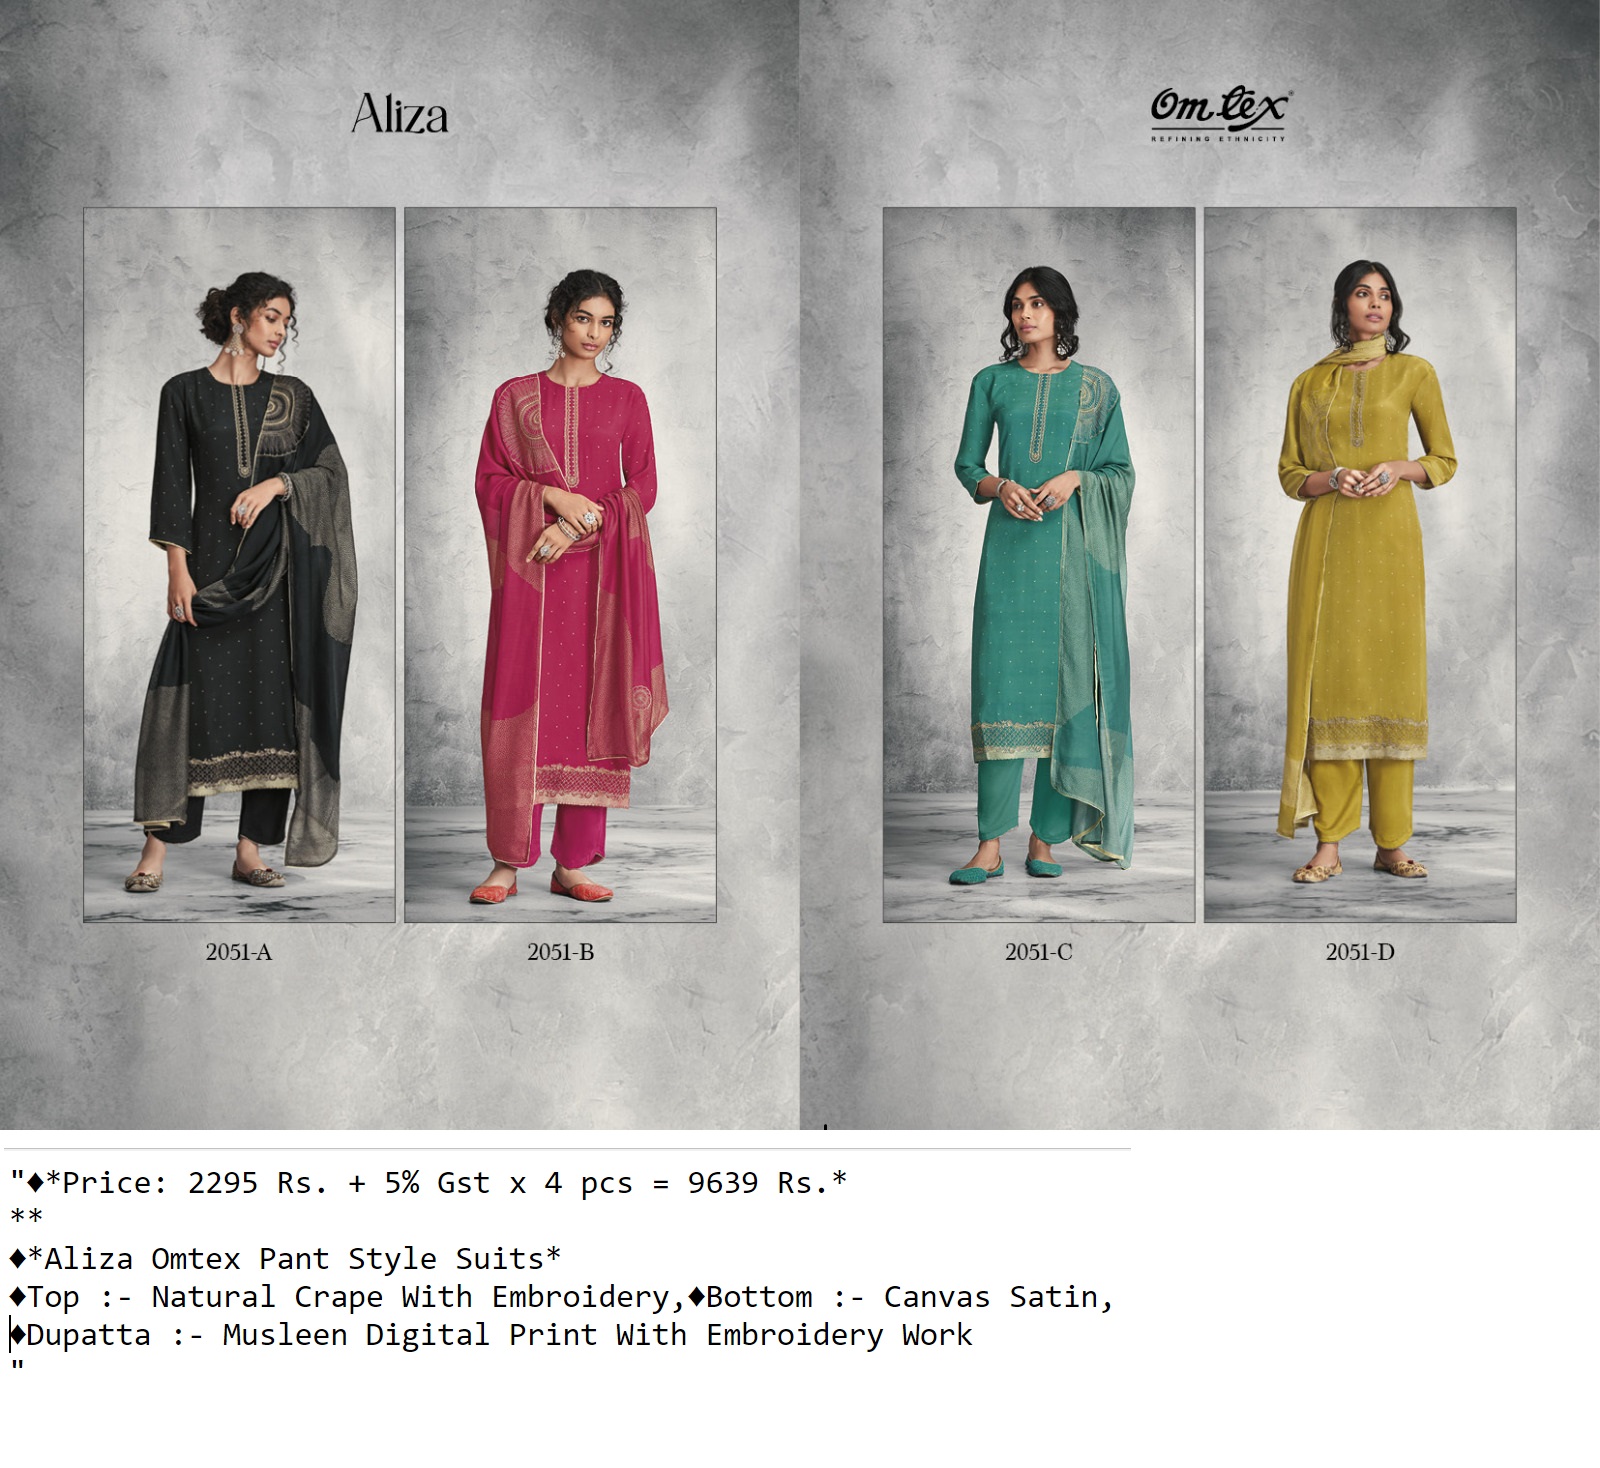 Aliza Omtex Pant Style Suits